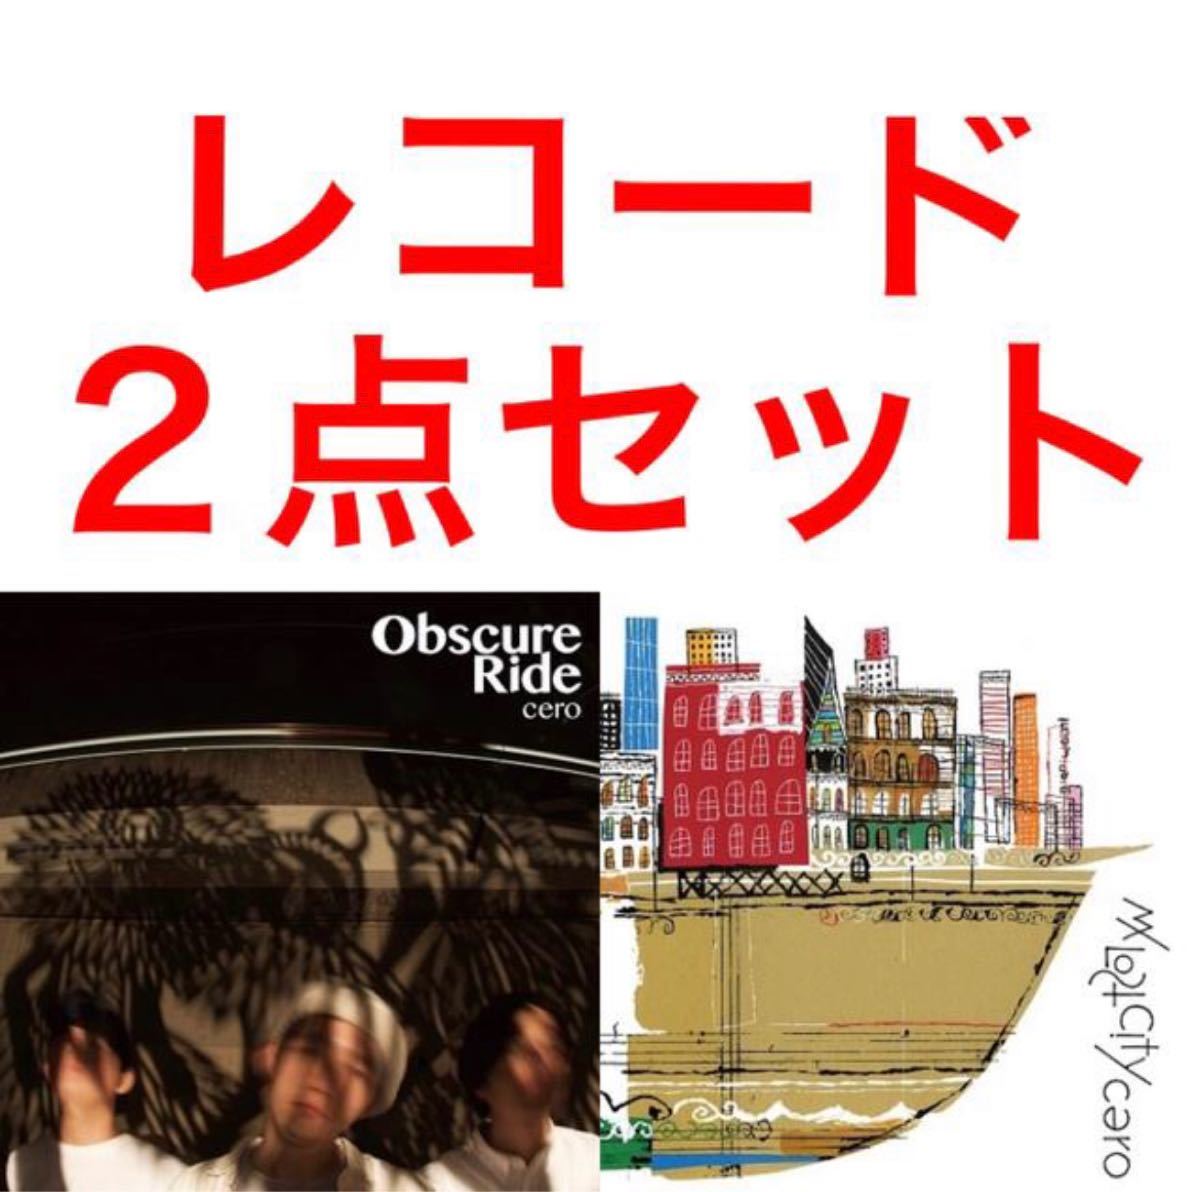 cero ／ Obscure Ride ・ MY LOST CITY アナログレコード［2LP］ ２点セット 新品未開封 